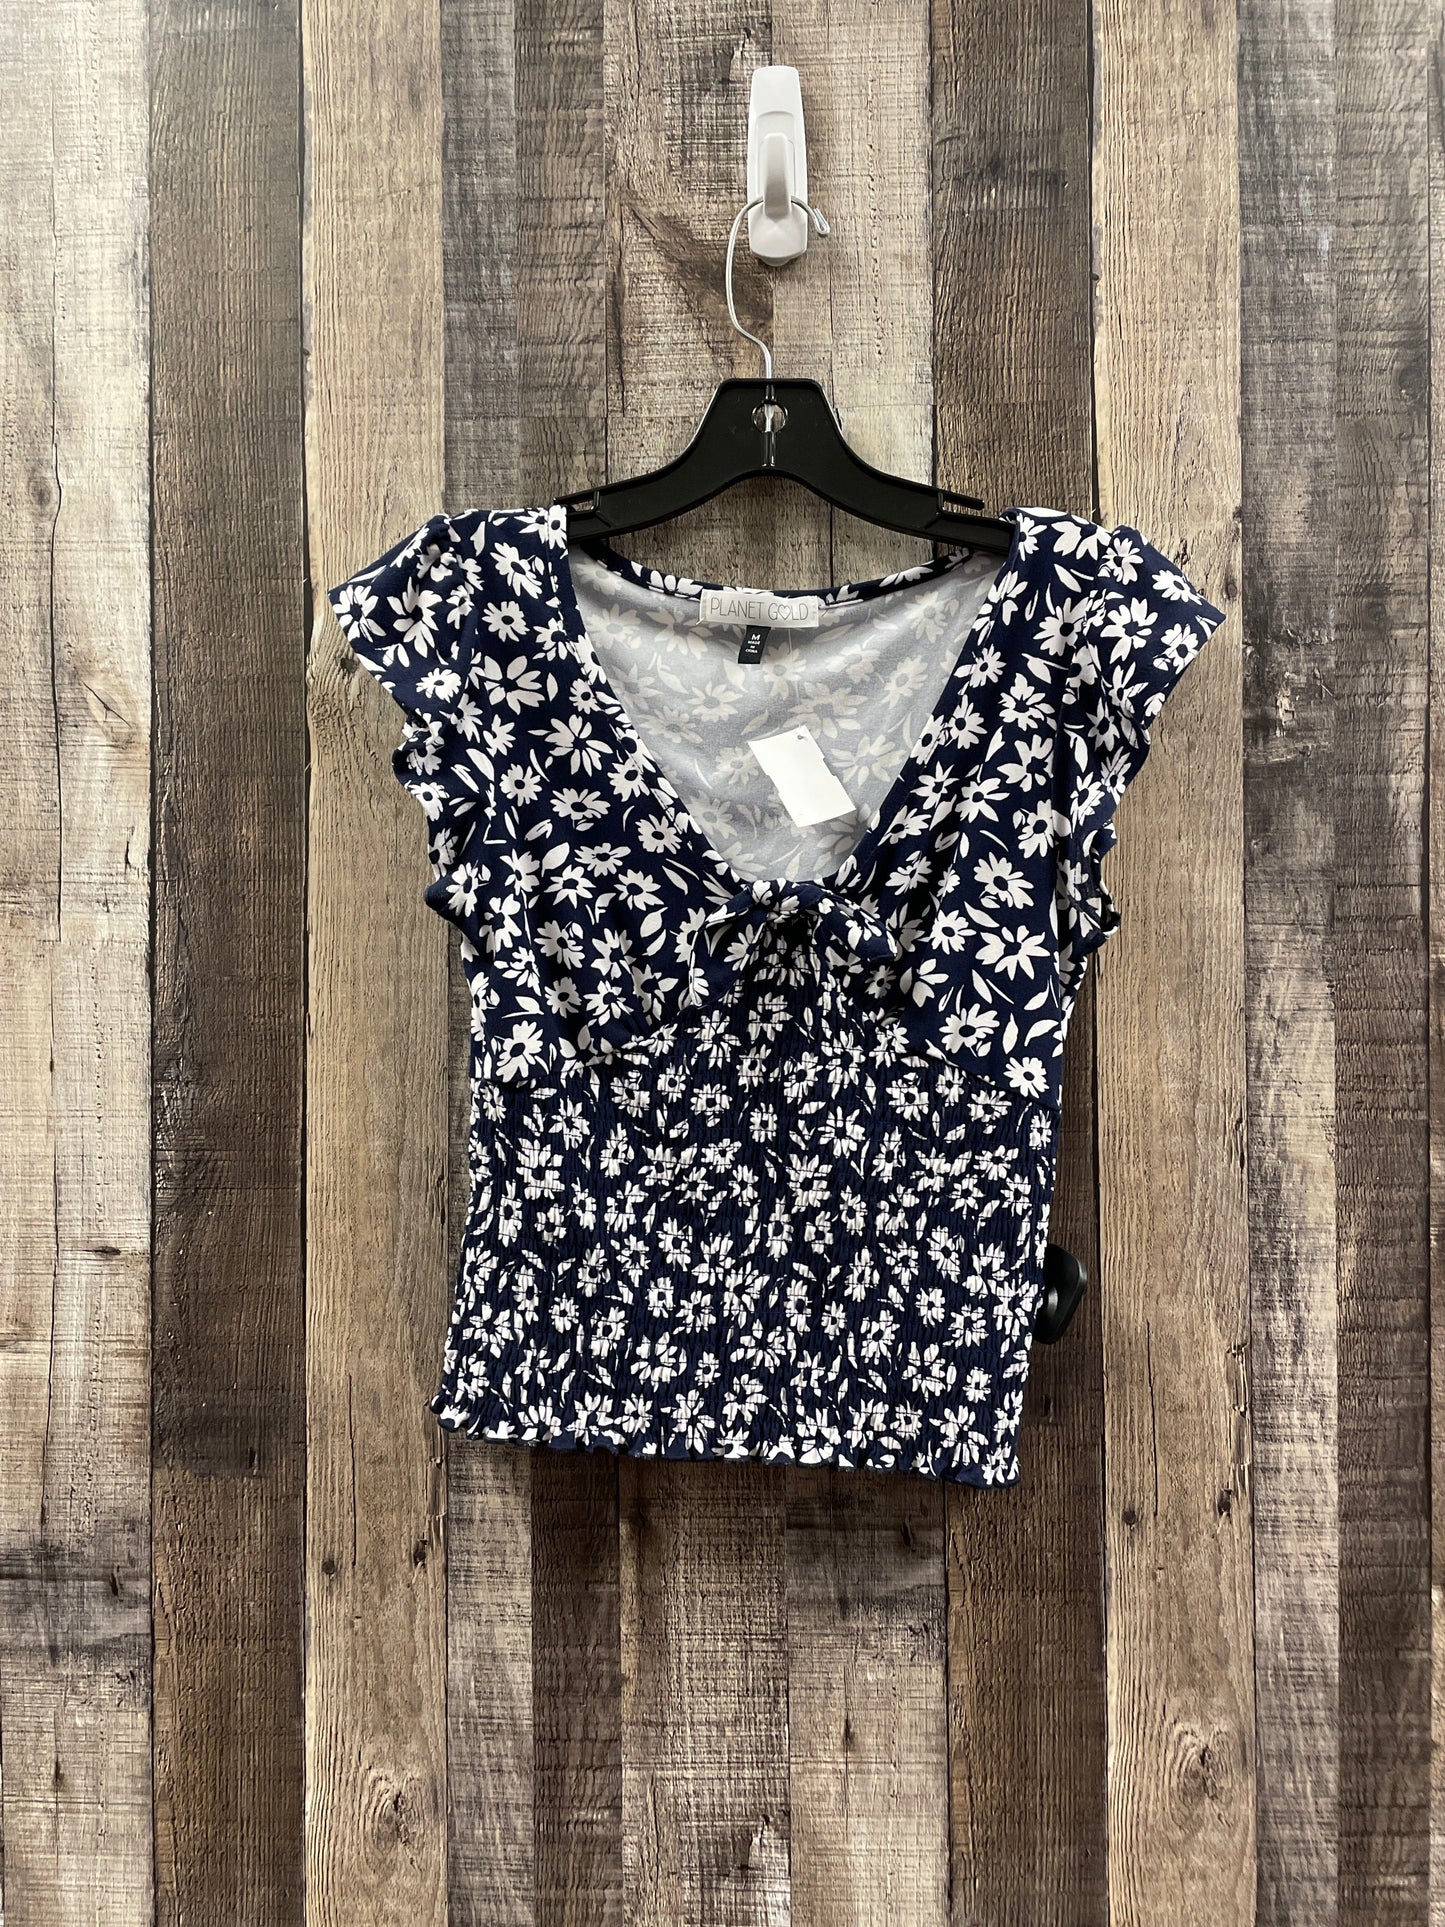 Blue & White Top Short Sleeve Cme, Size M